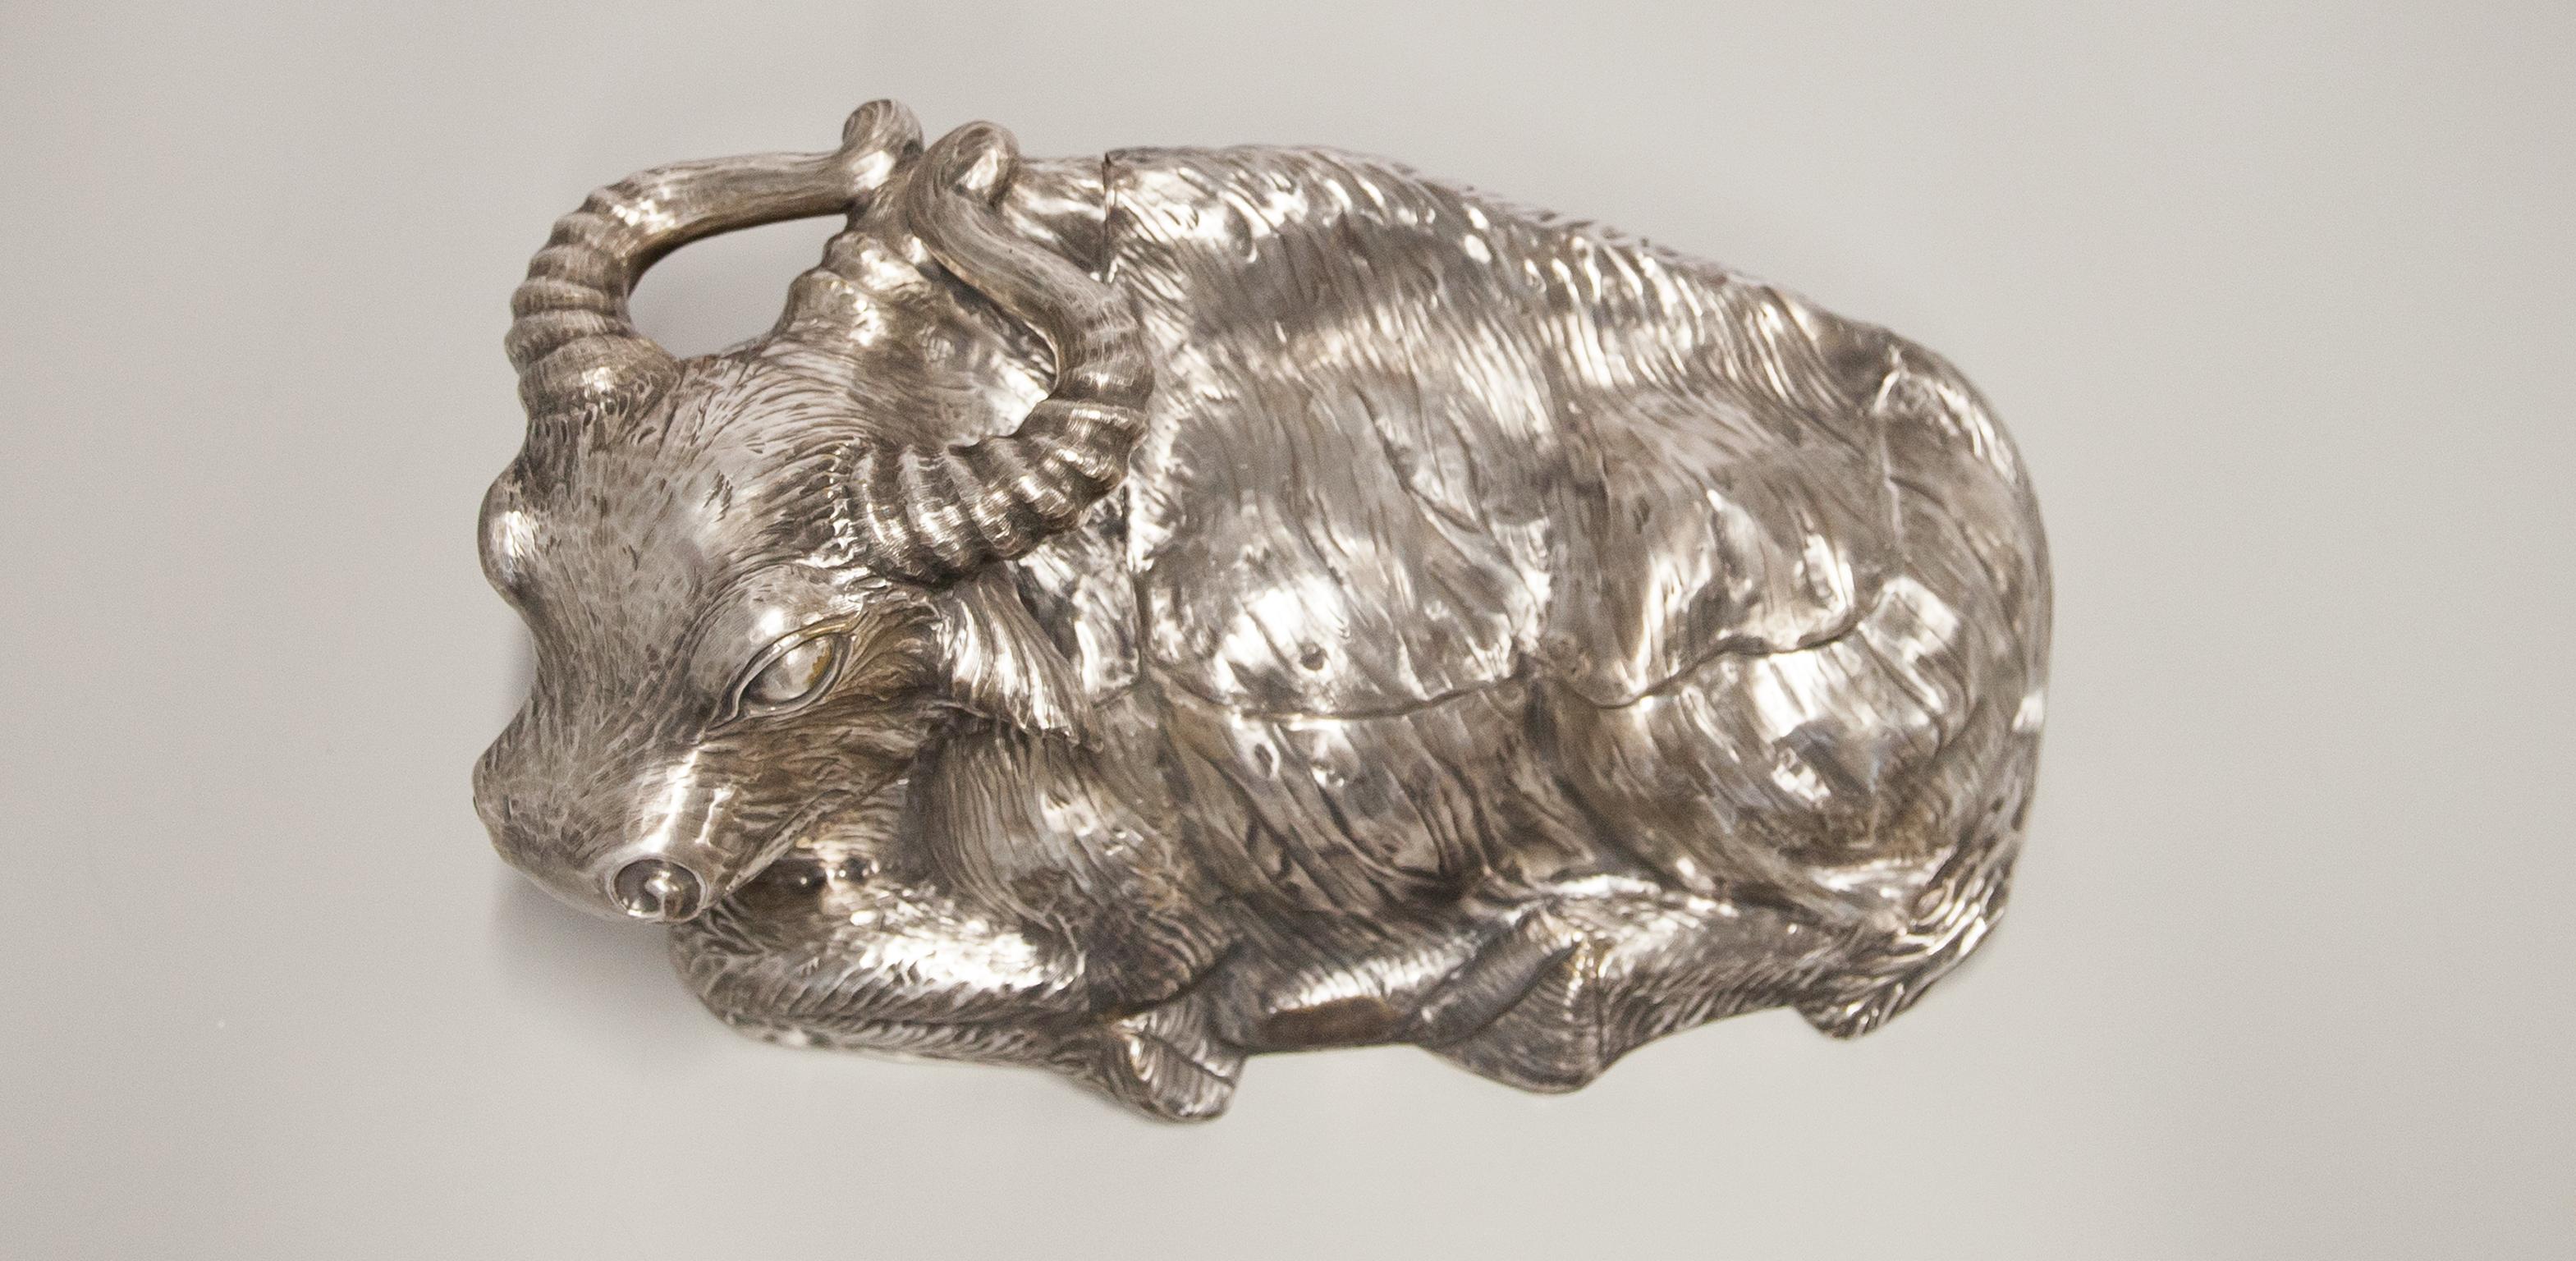 Unique outstanding Tibetan bull designed by Gabriella Crespi in brushed metal in the 1970s. A wonderful single piece and signed on the bottom. Maybe it was a prototype.